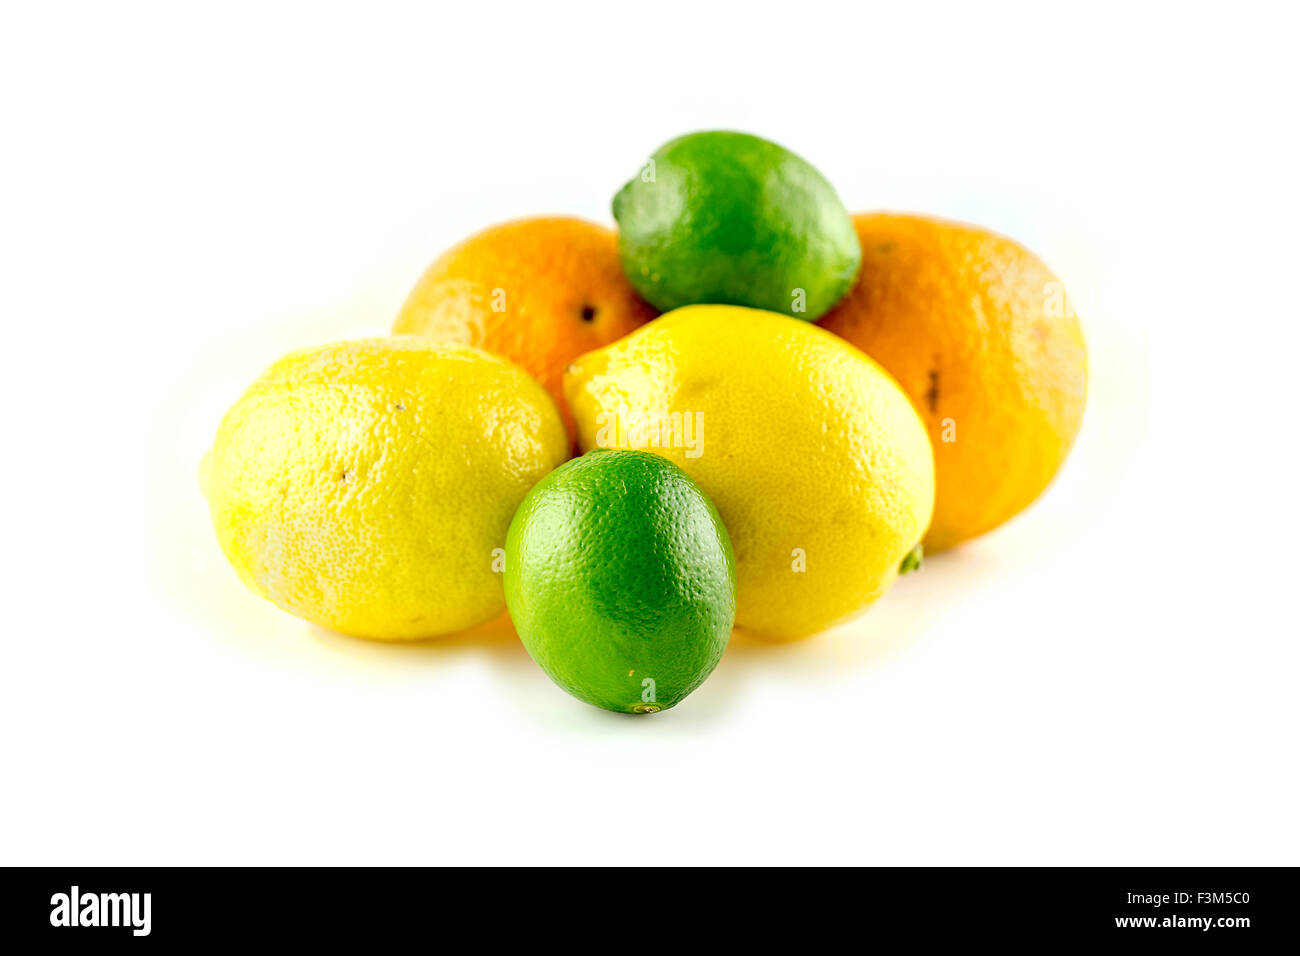 Pile of tasty citrus fruits with oranges lemons and limes Stock Photo